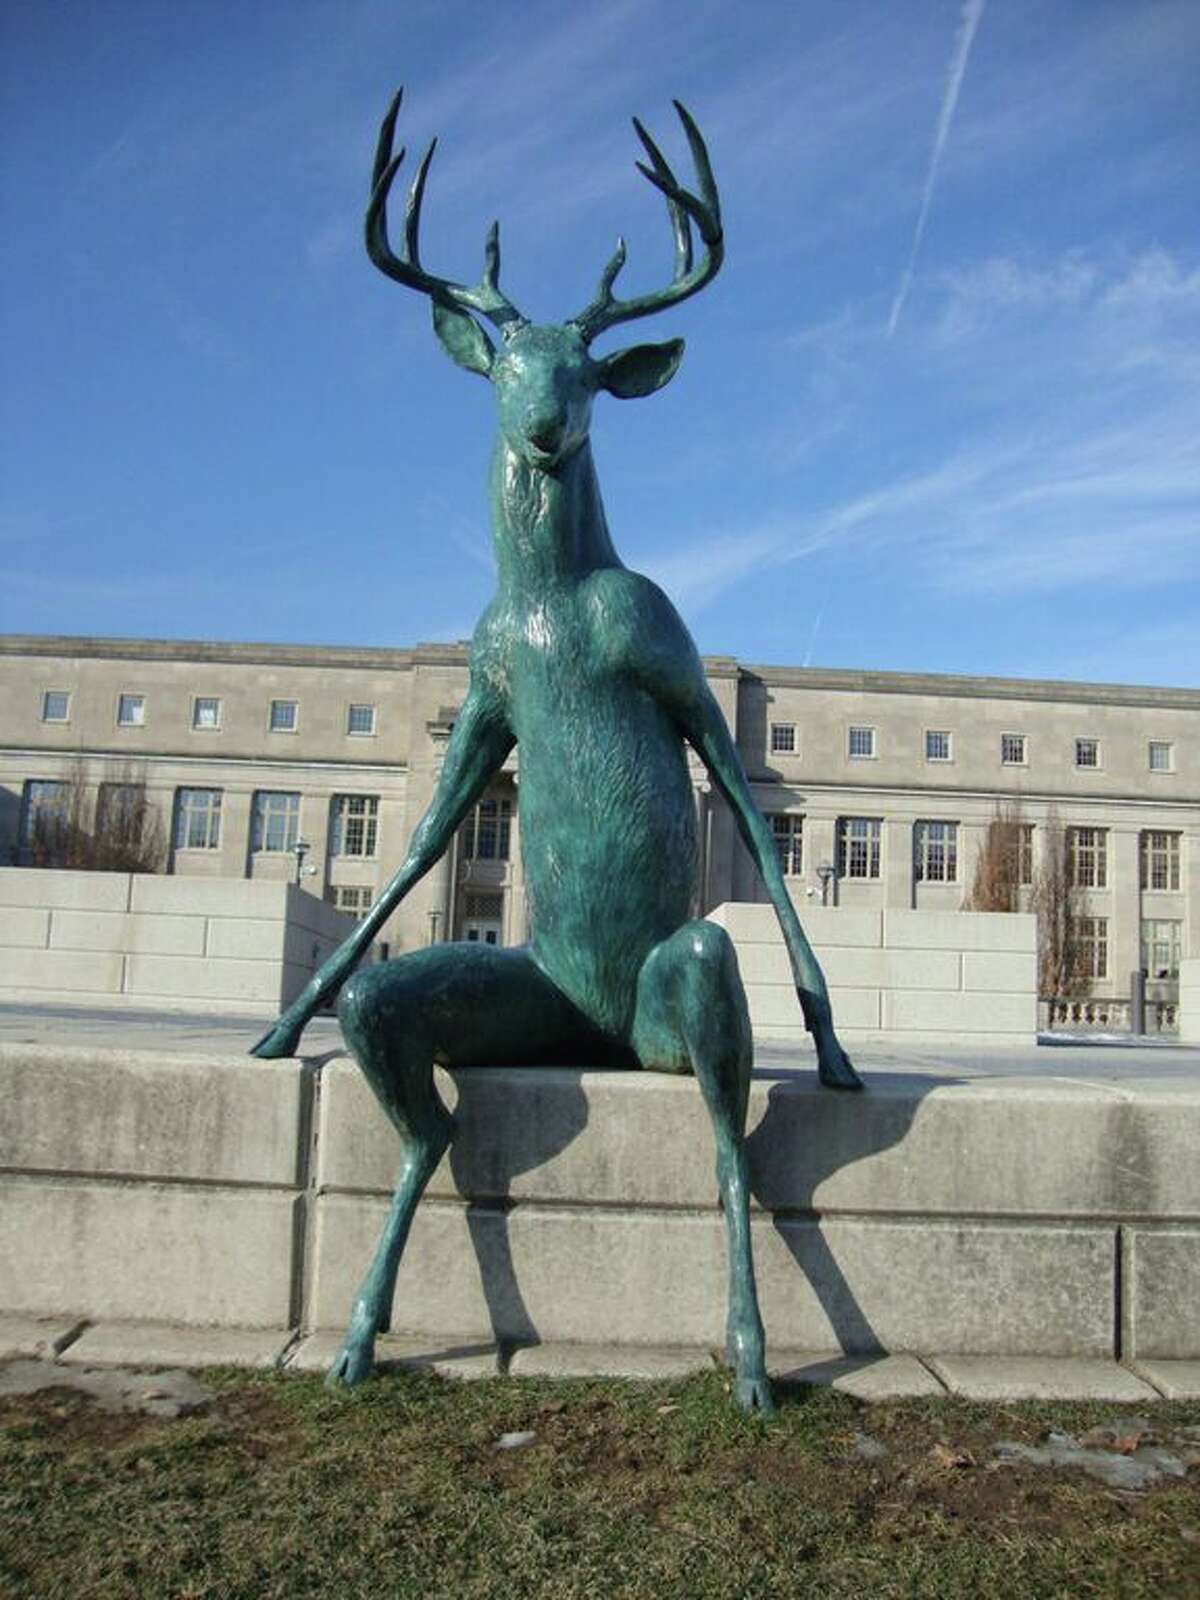 This sculpture of a deer is part of the new public art display on the river in Columbus, Ohio.